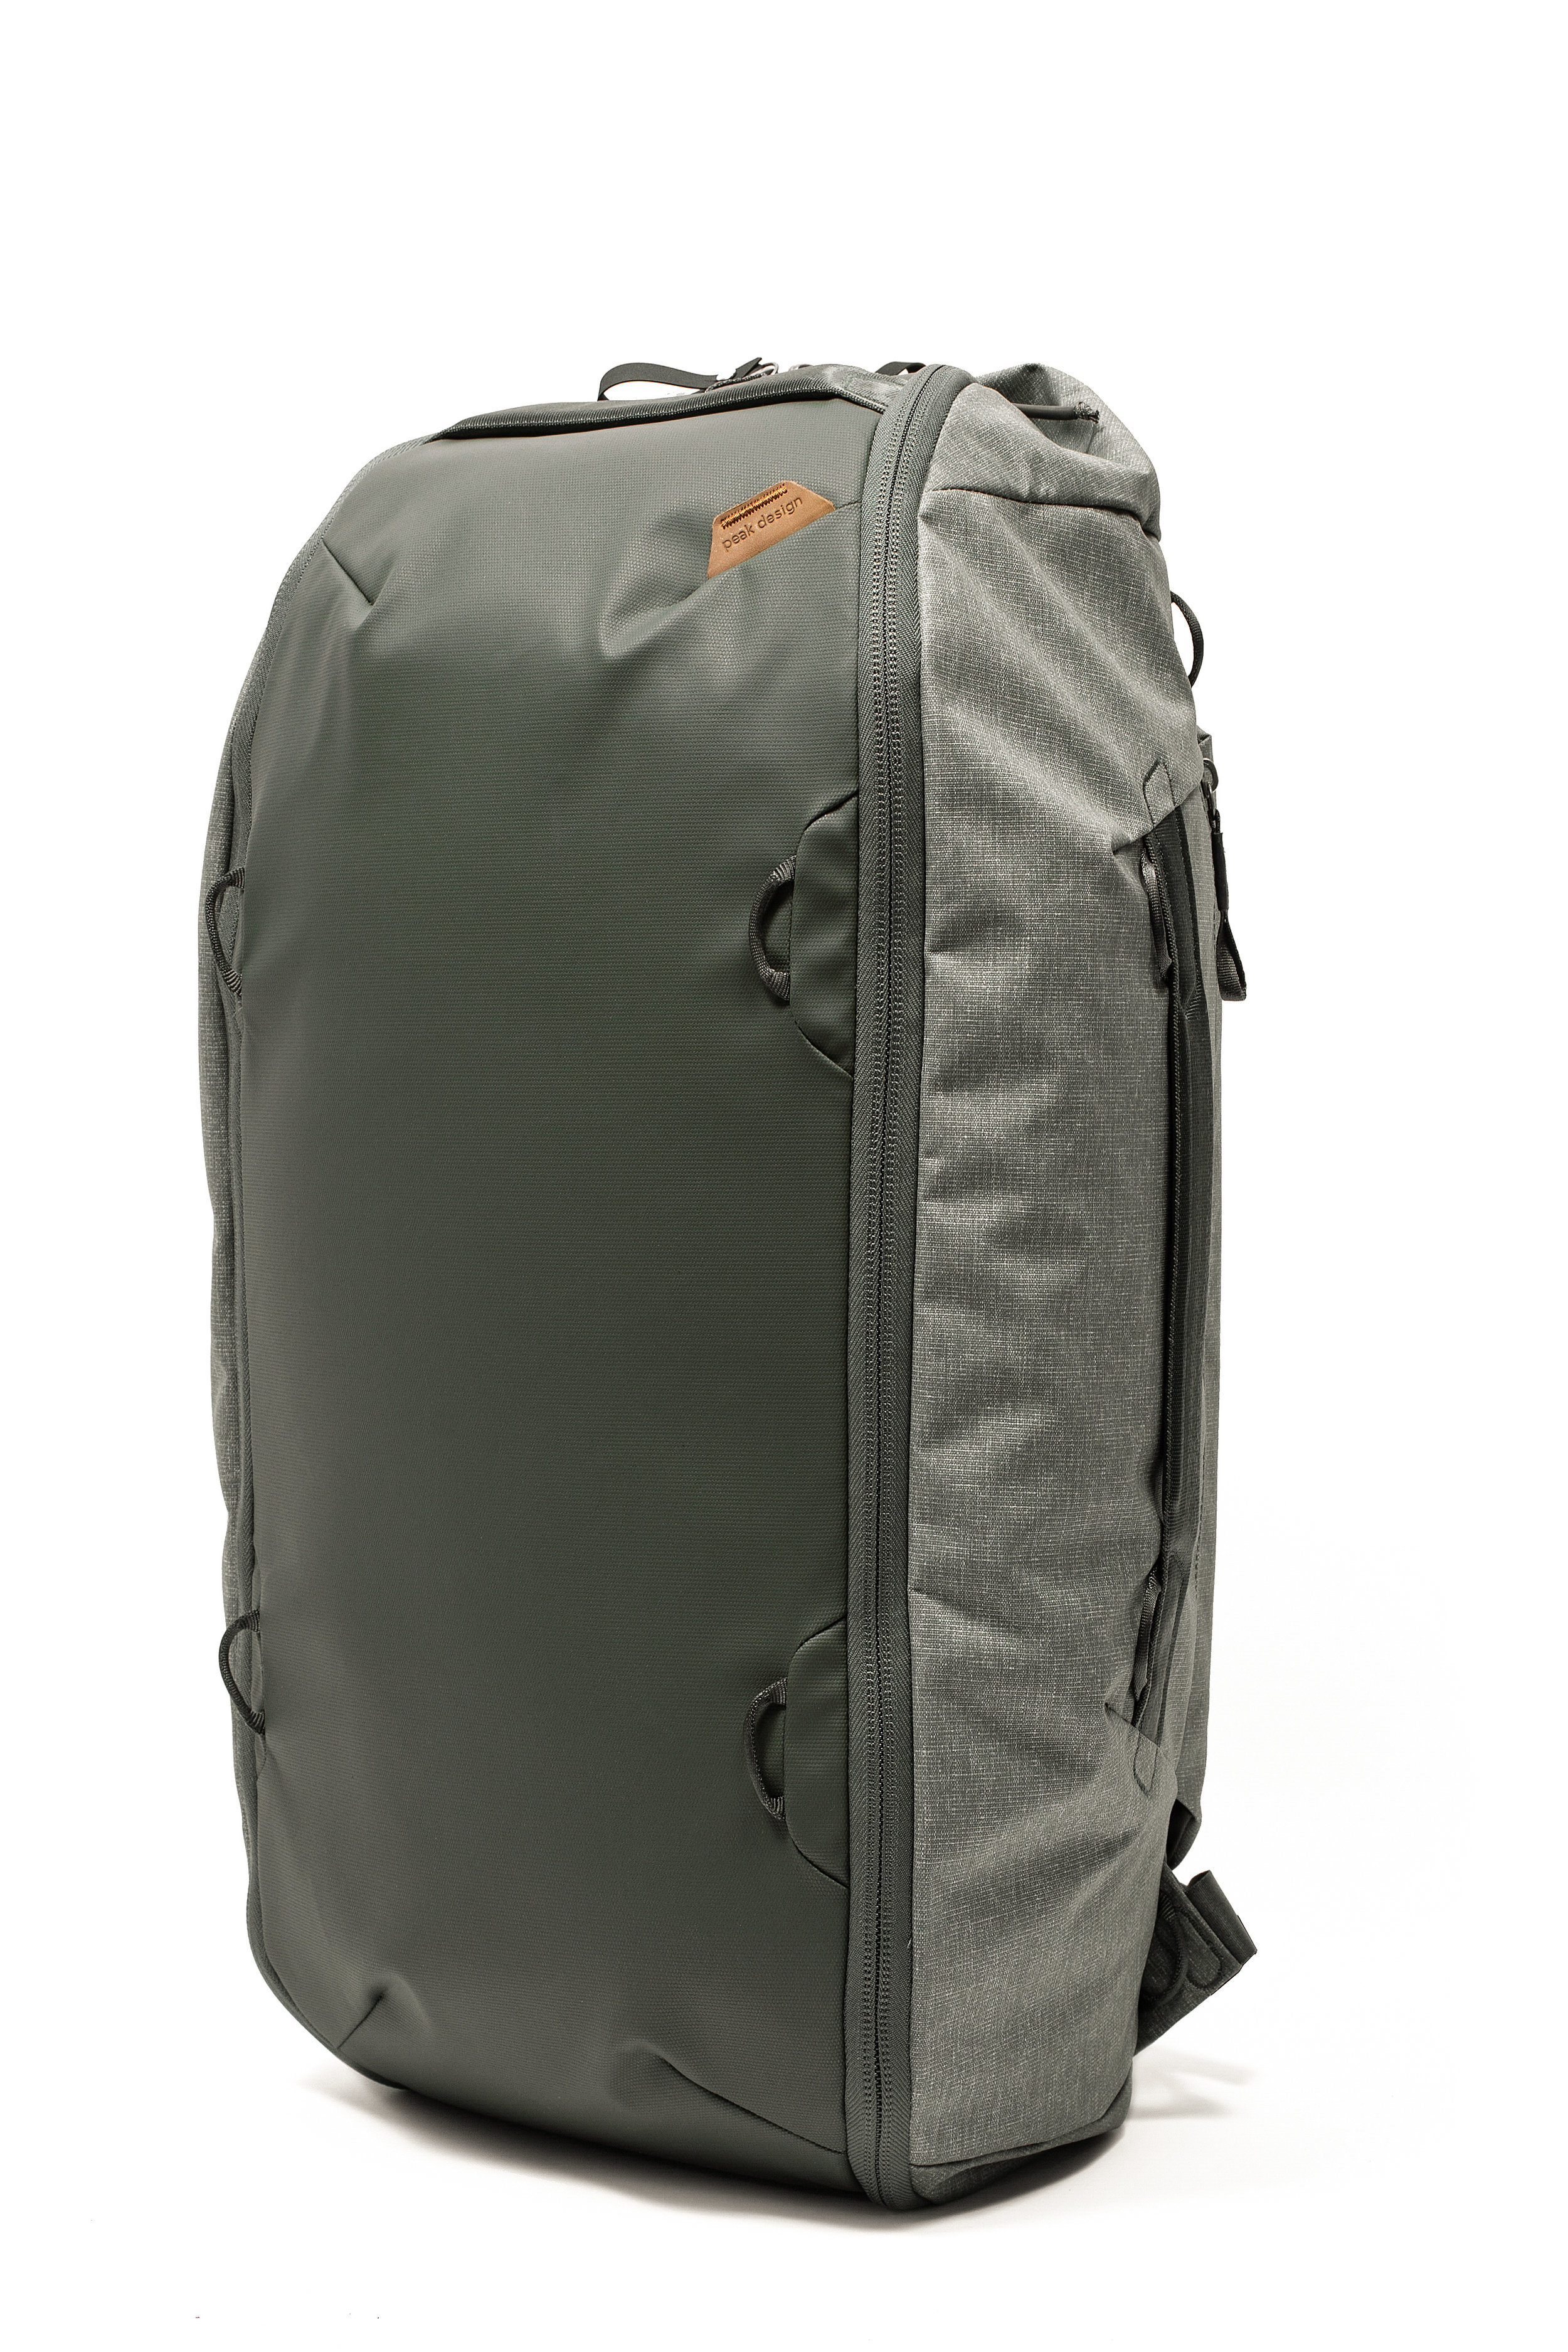 Peak Design Travel Duffelpack 65L Review — duuude | Only the Good Stuff ...